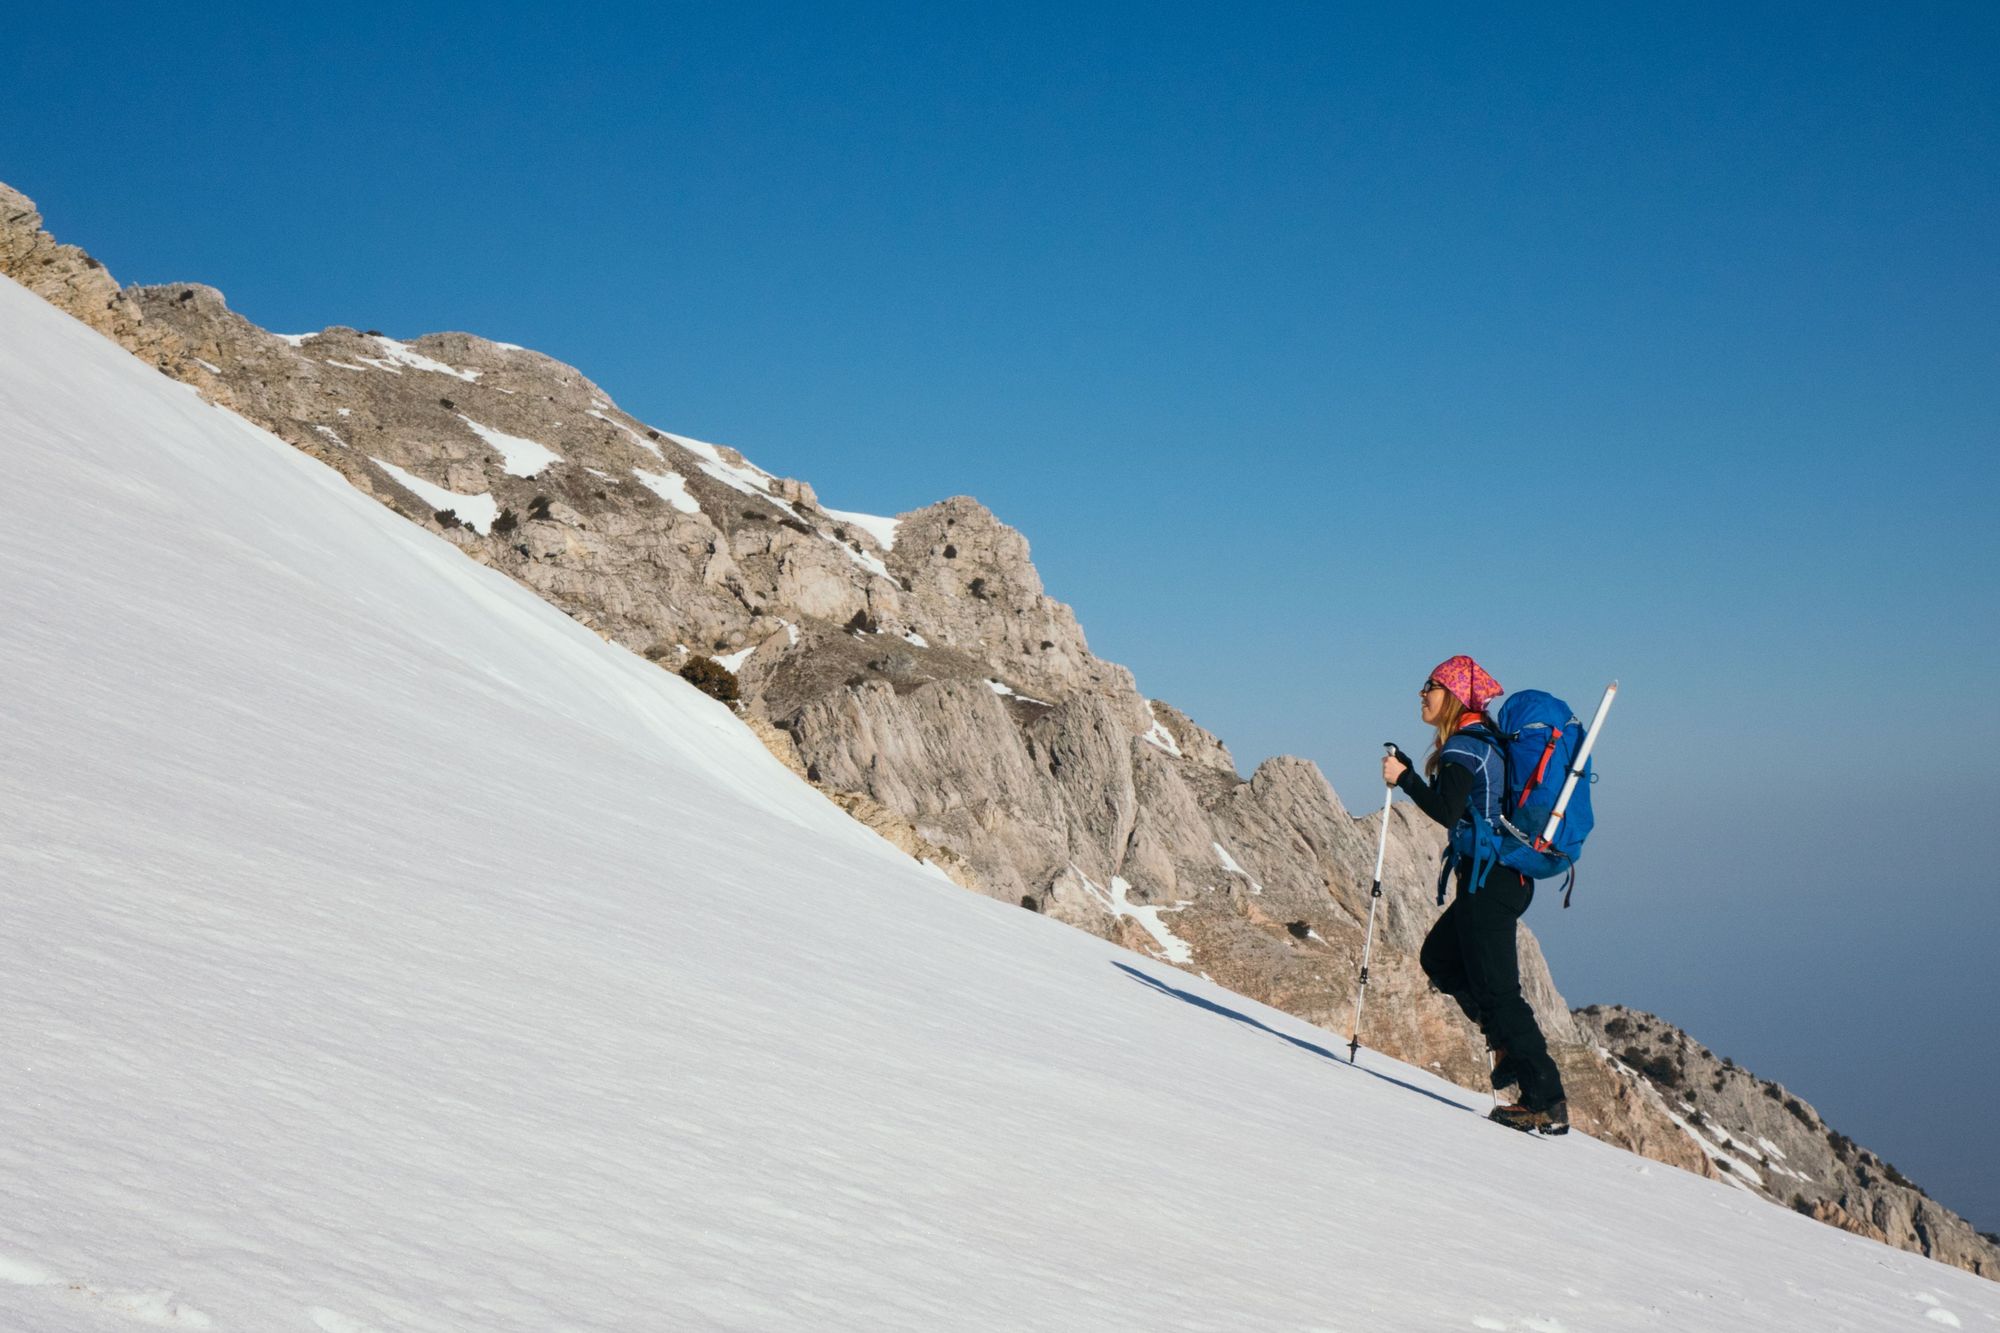 A woman climbs a mountain with a walking pole and ice axe.